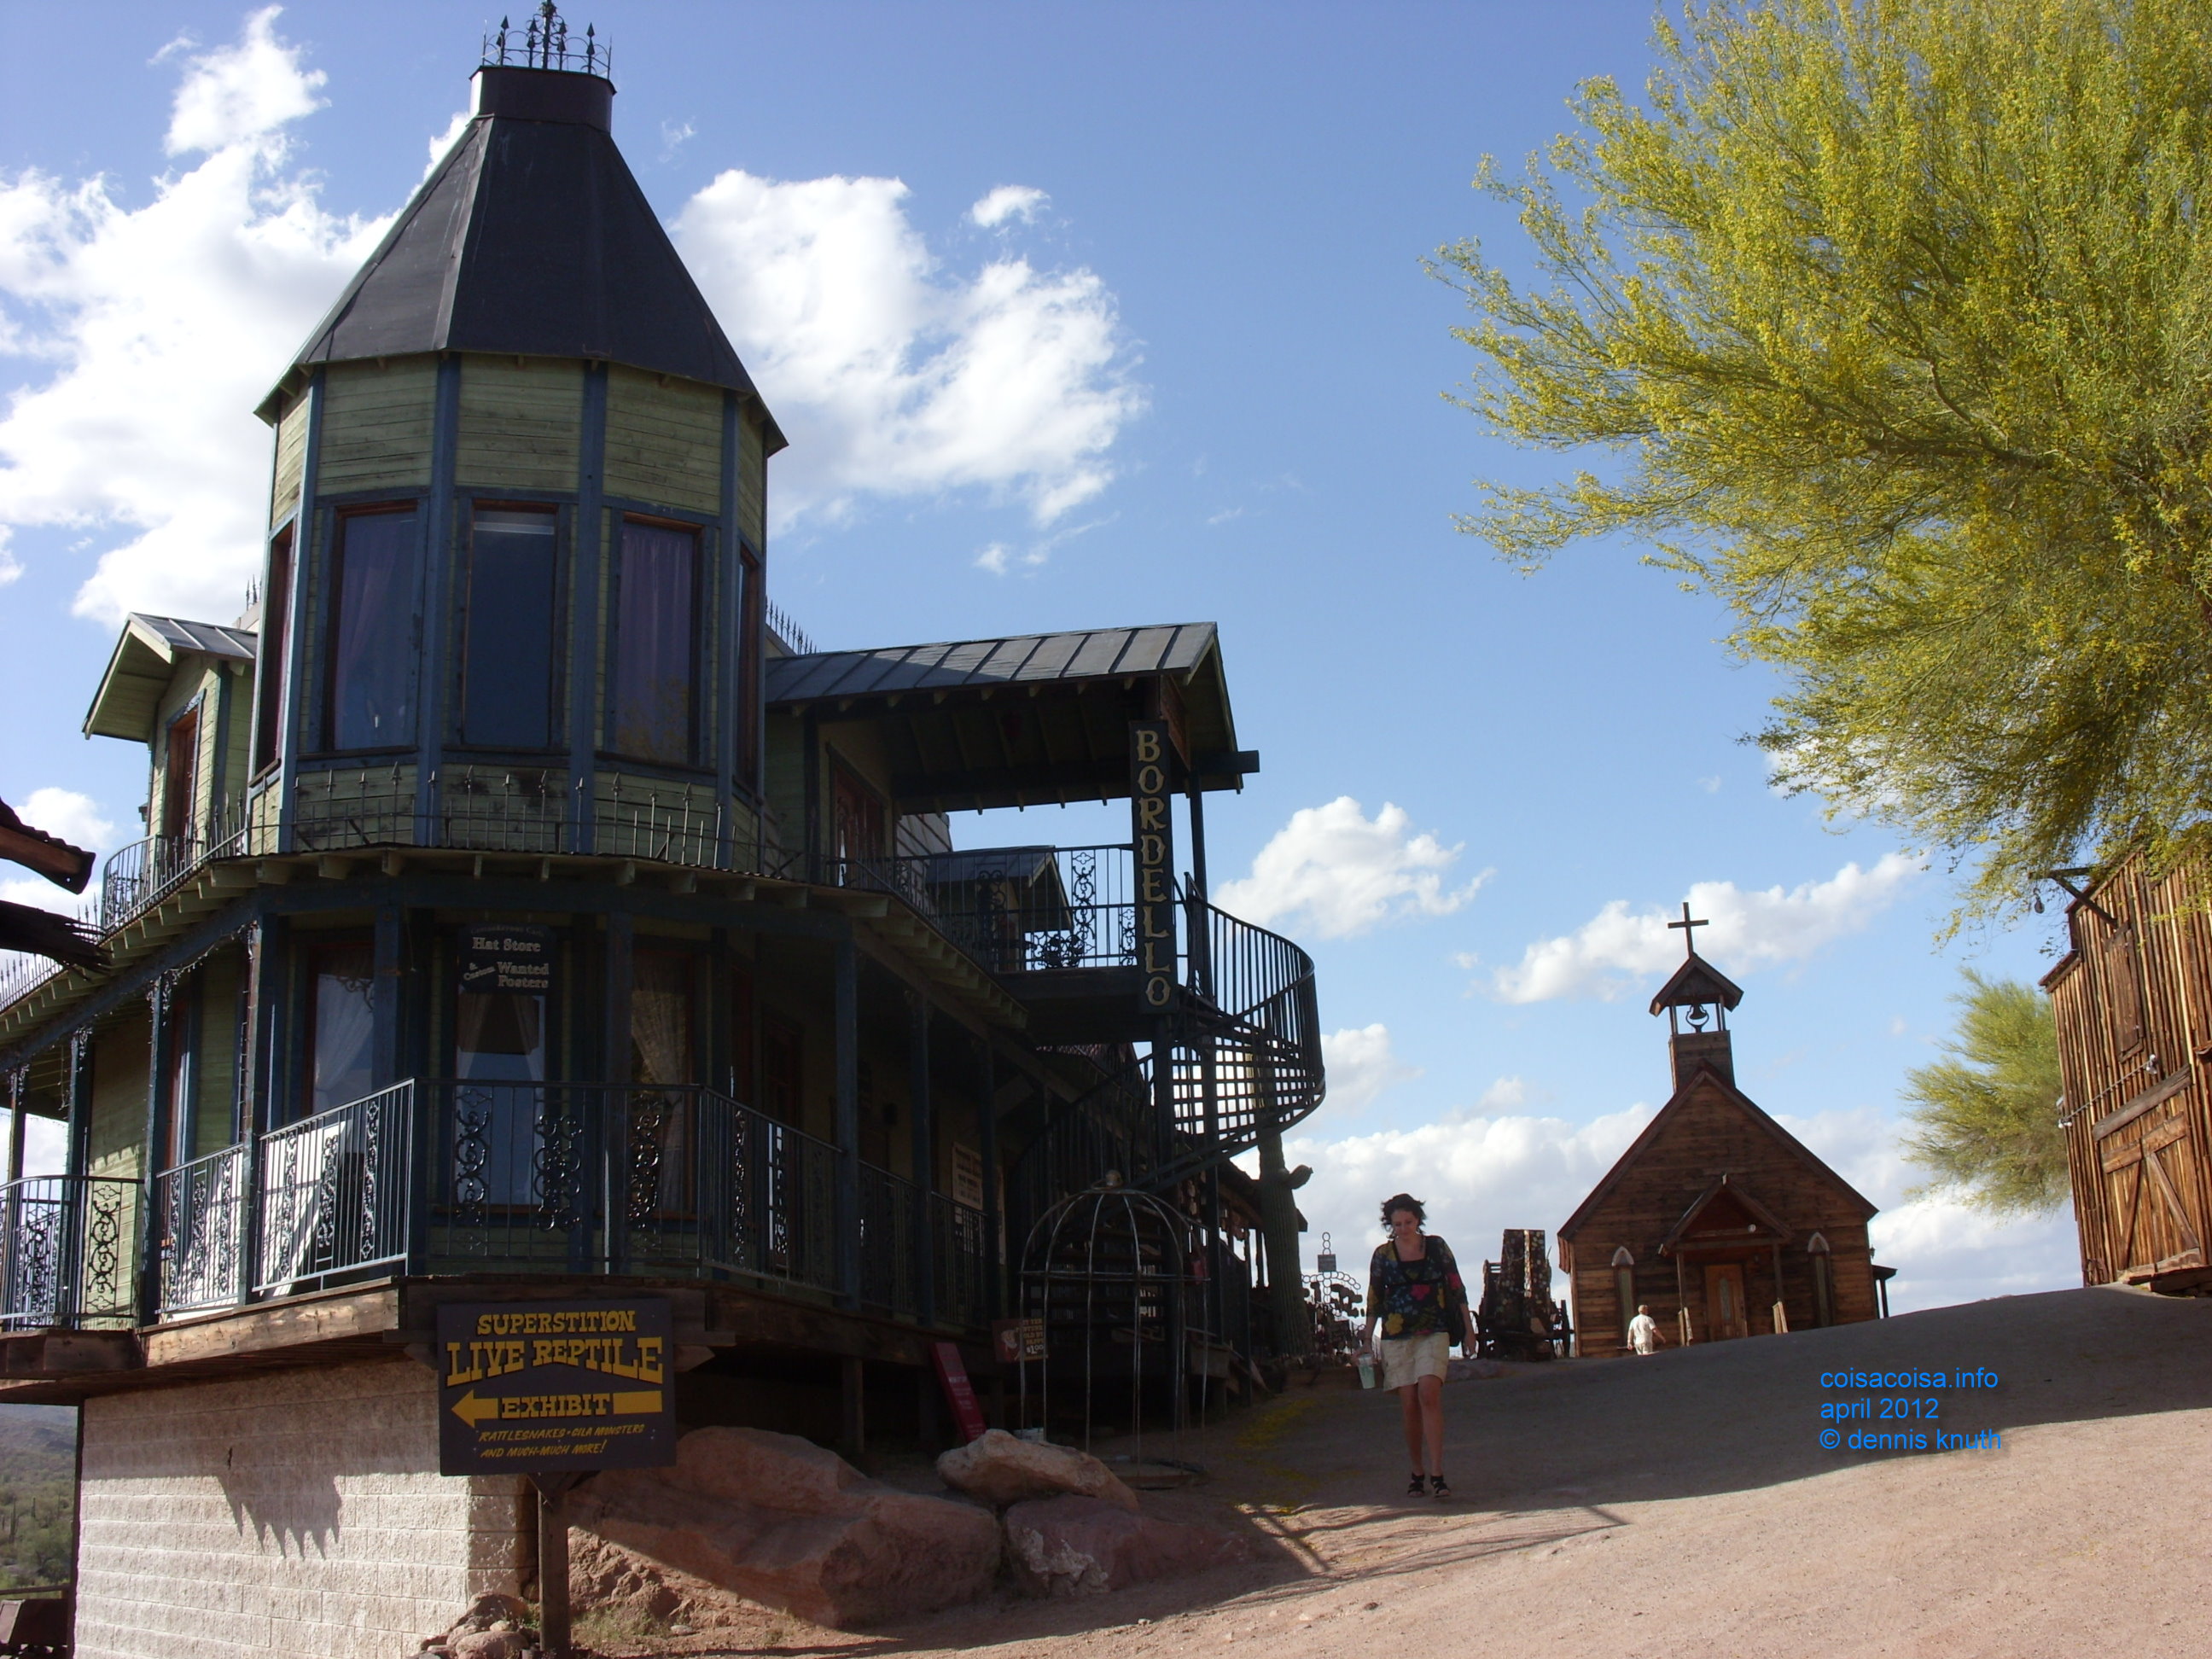 2012_04_26_e_apache_junction_ghost_town_0032.jpg (large)